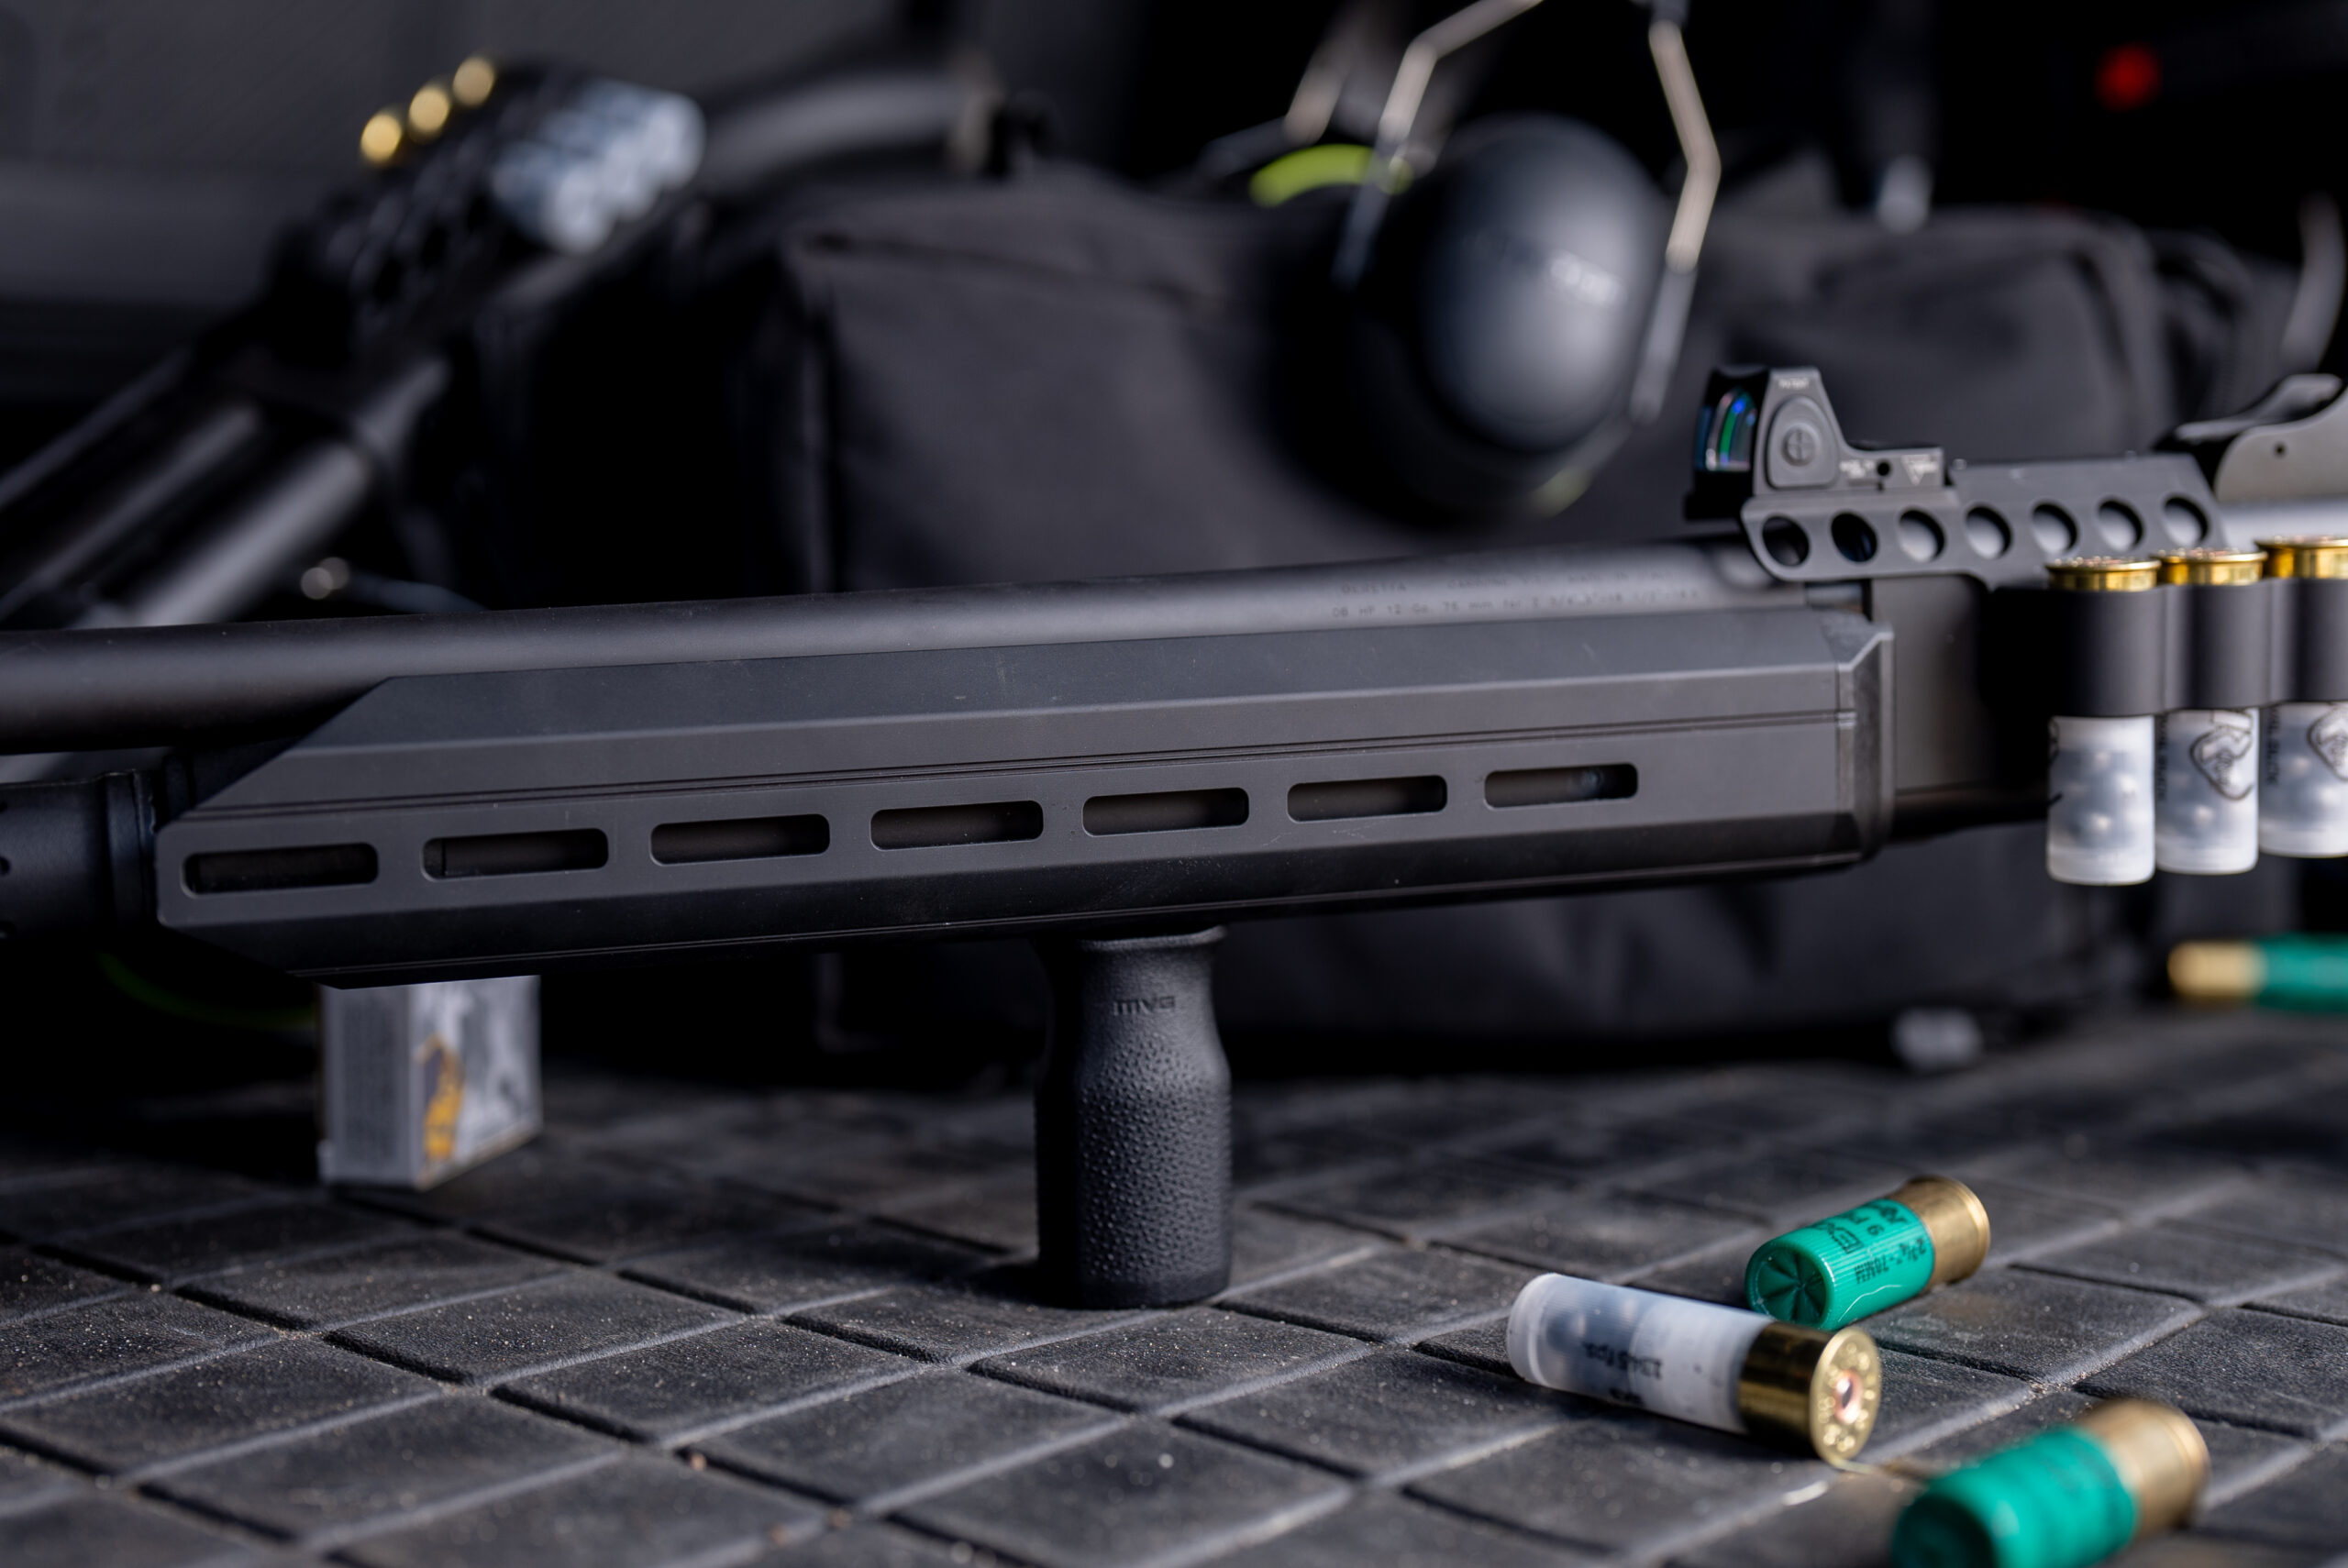 Adapt Your Beretta 1301 to Any Situation - The Mesa Tactical Truckee